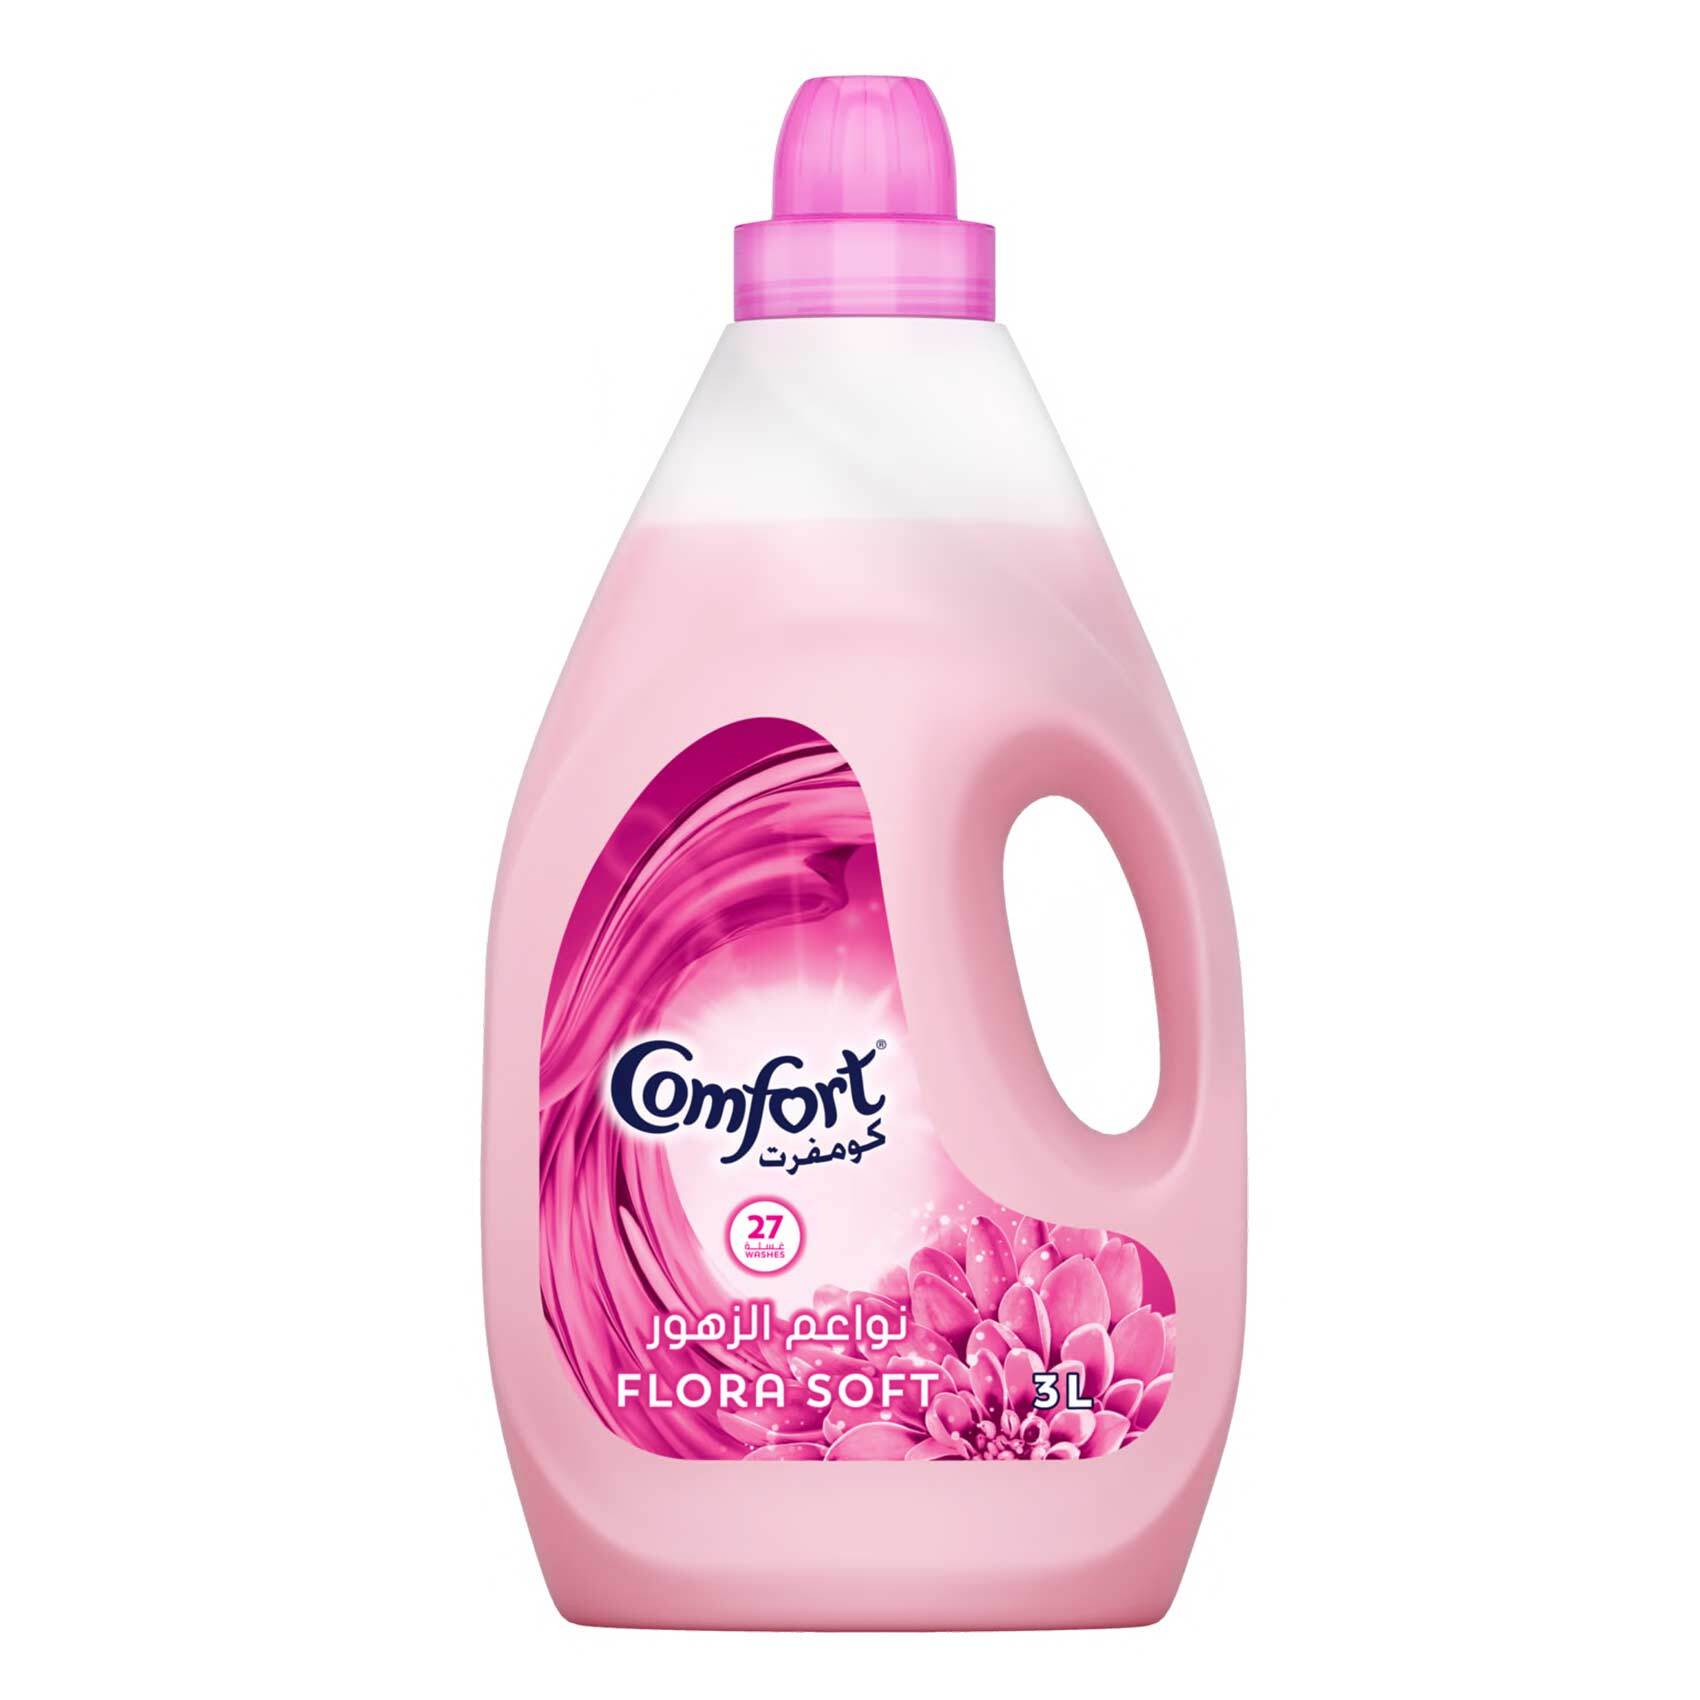 Buy Comfort Long Lasting Fragrance Flora Soft Fabric Softener 3L Online -  Shop Cleaning & Household on Carrefour Lebanon